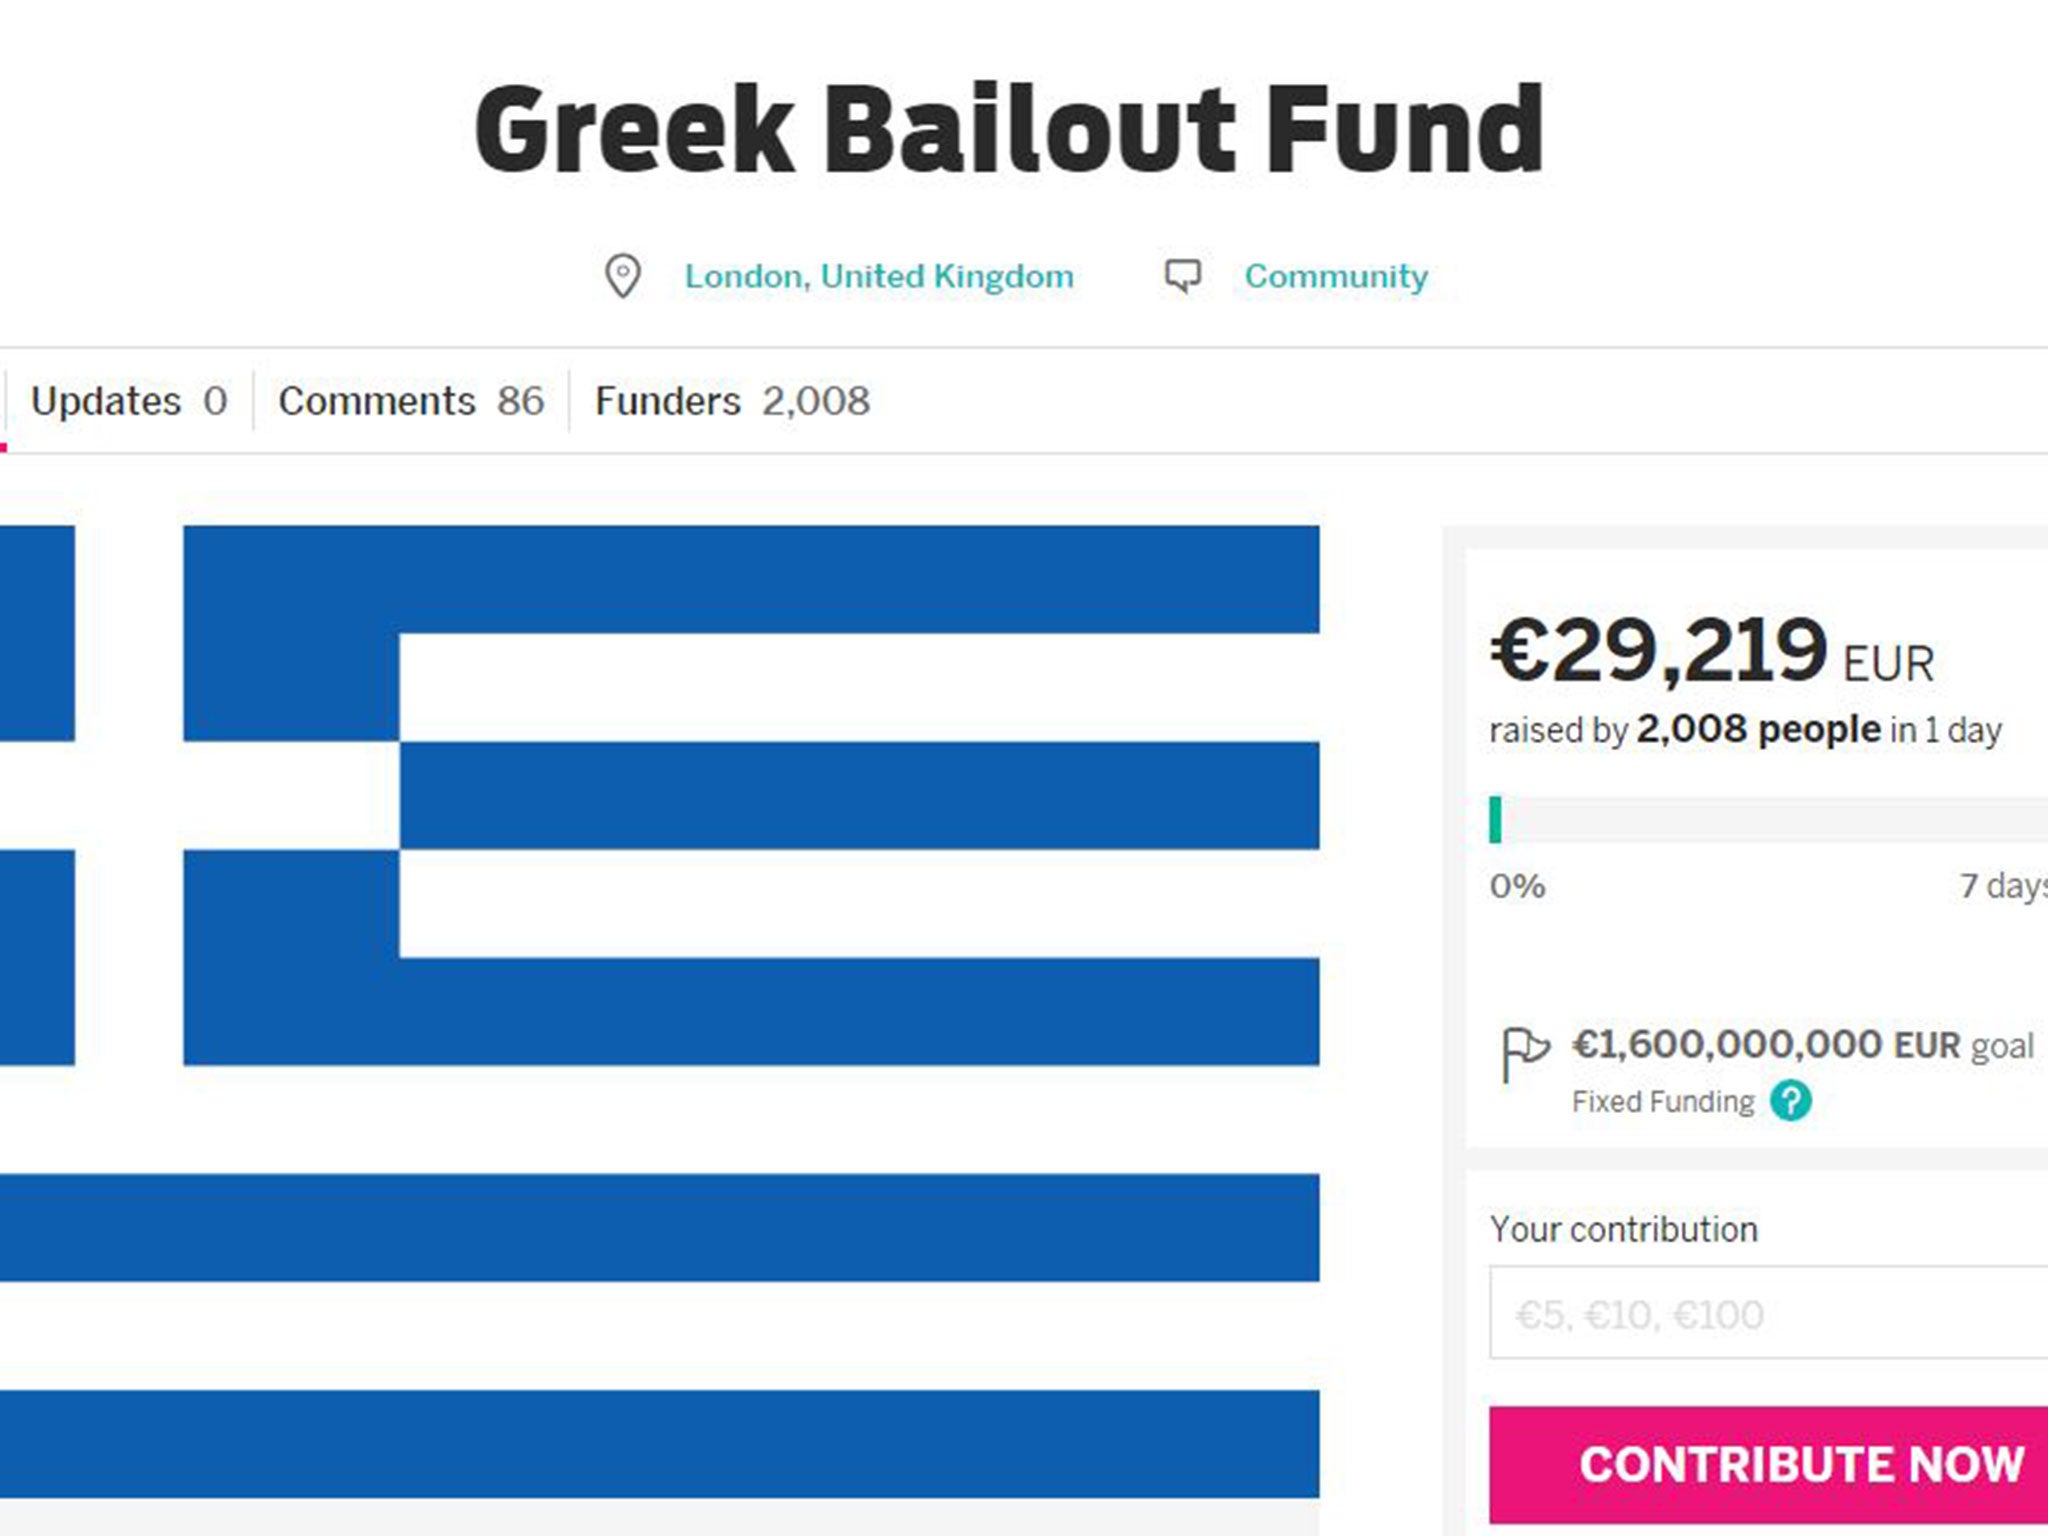 Thousands of people have contributed to a crowdfunding campaign to fund the Greek bailout